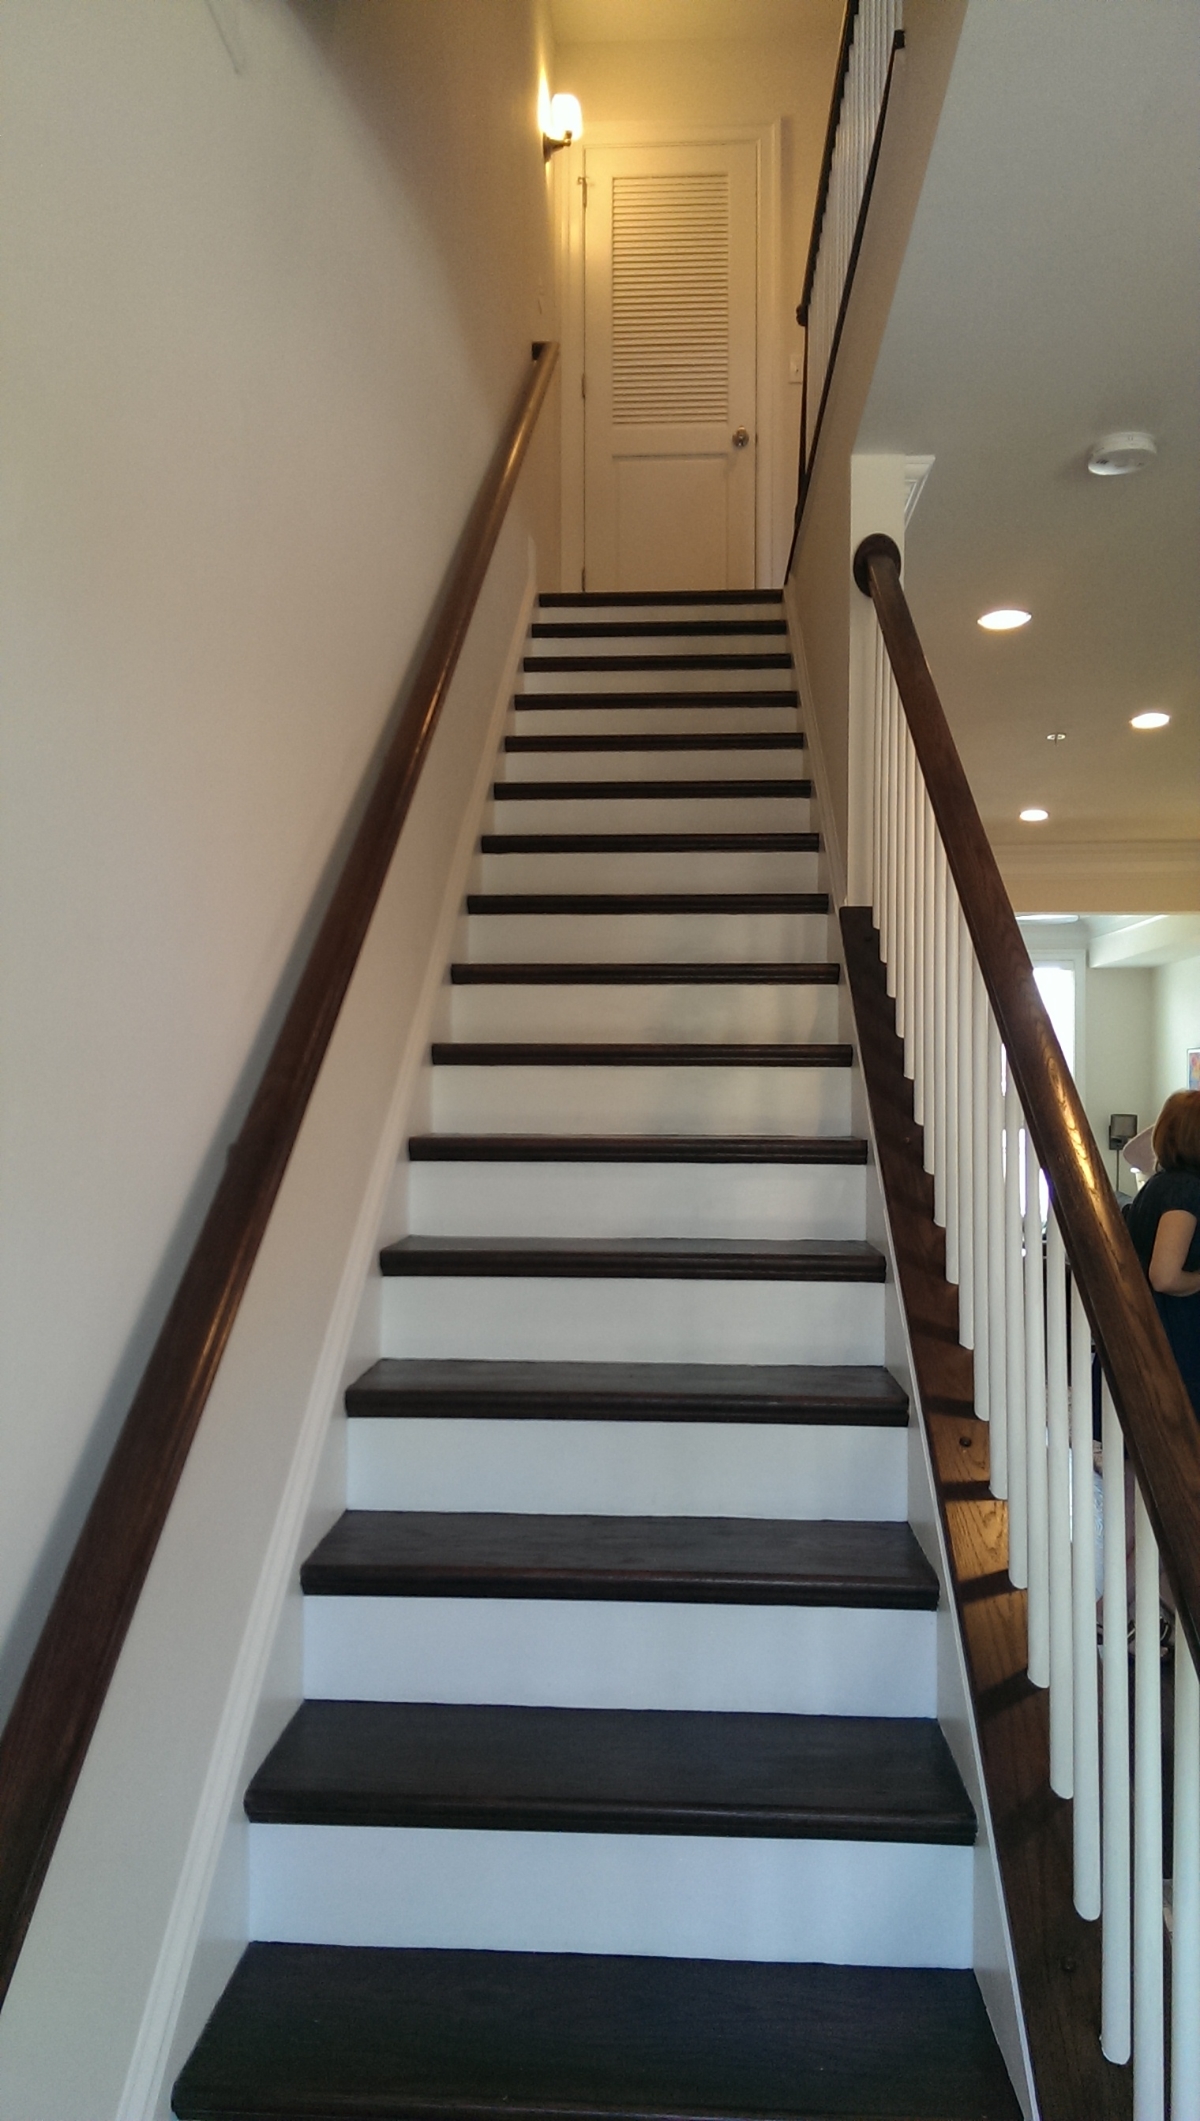 Interior stairwells include the riser height and tread for each staircase.